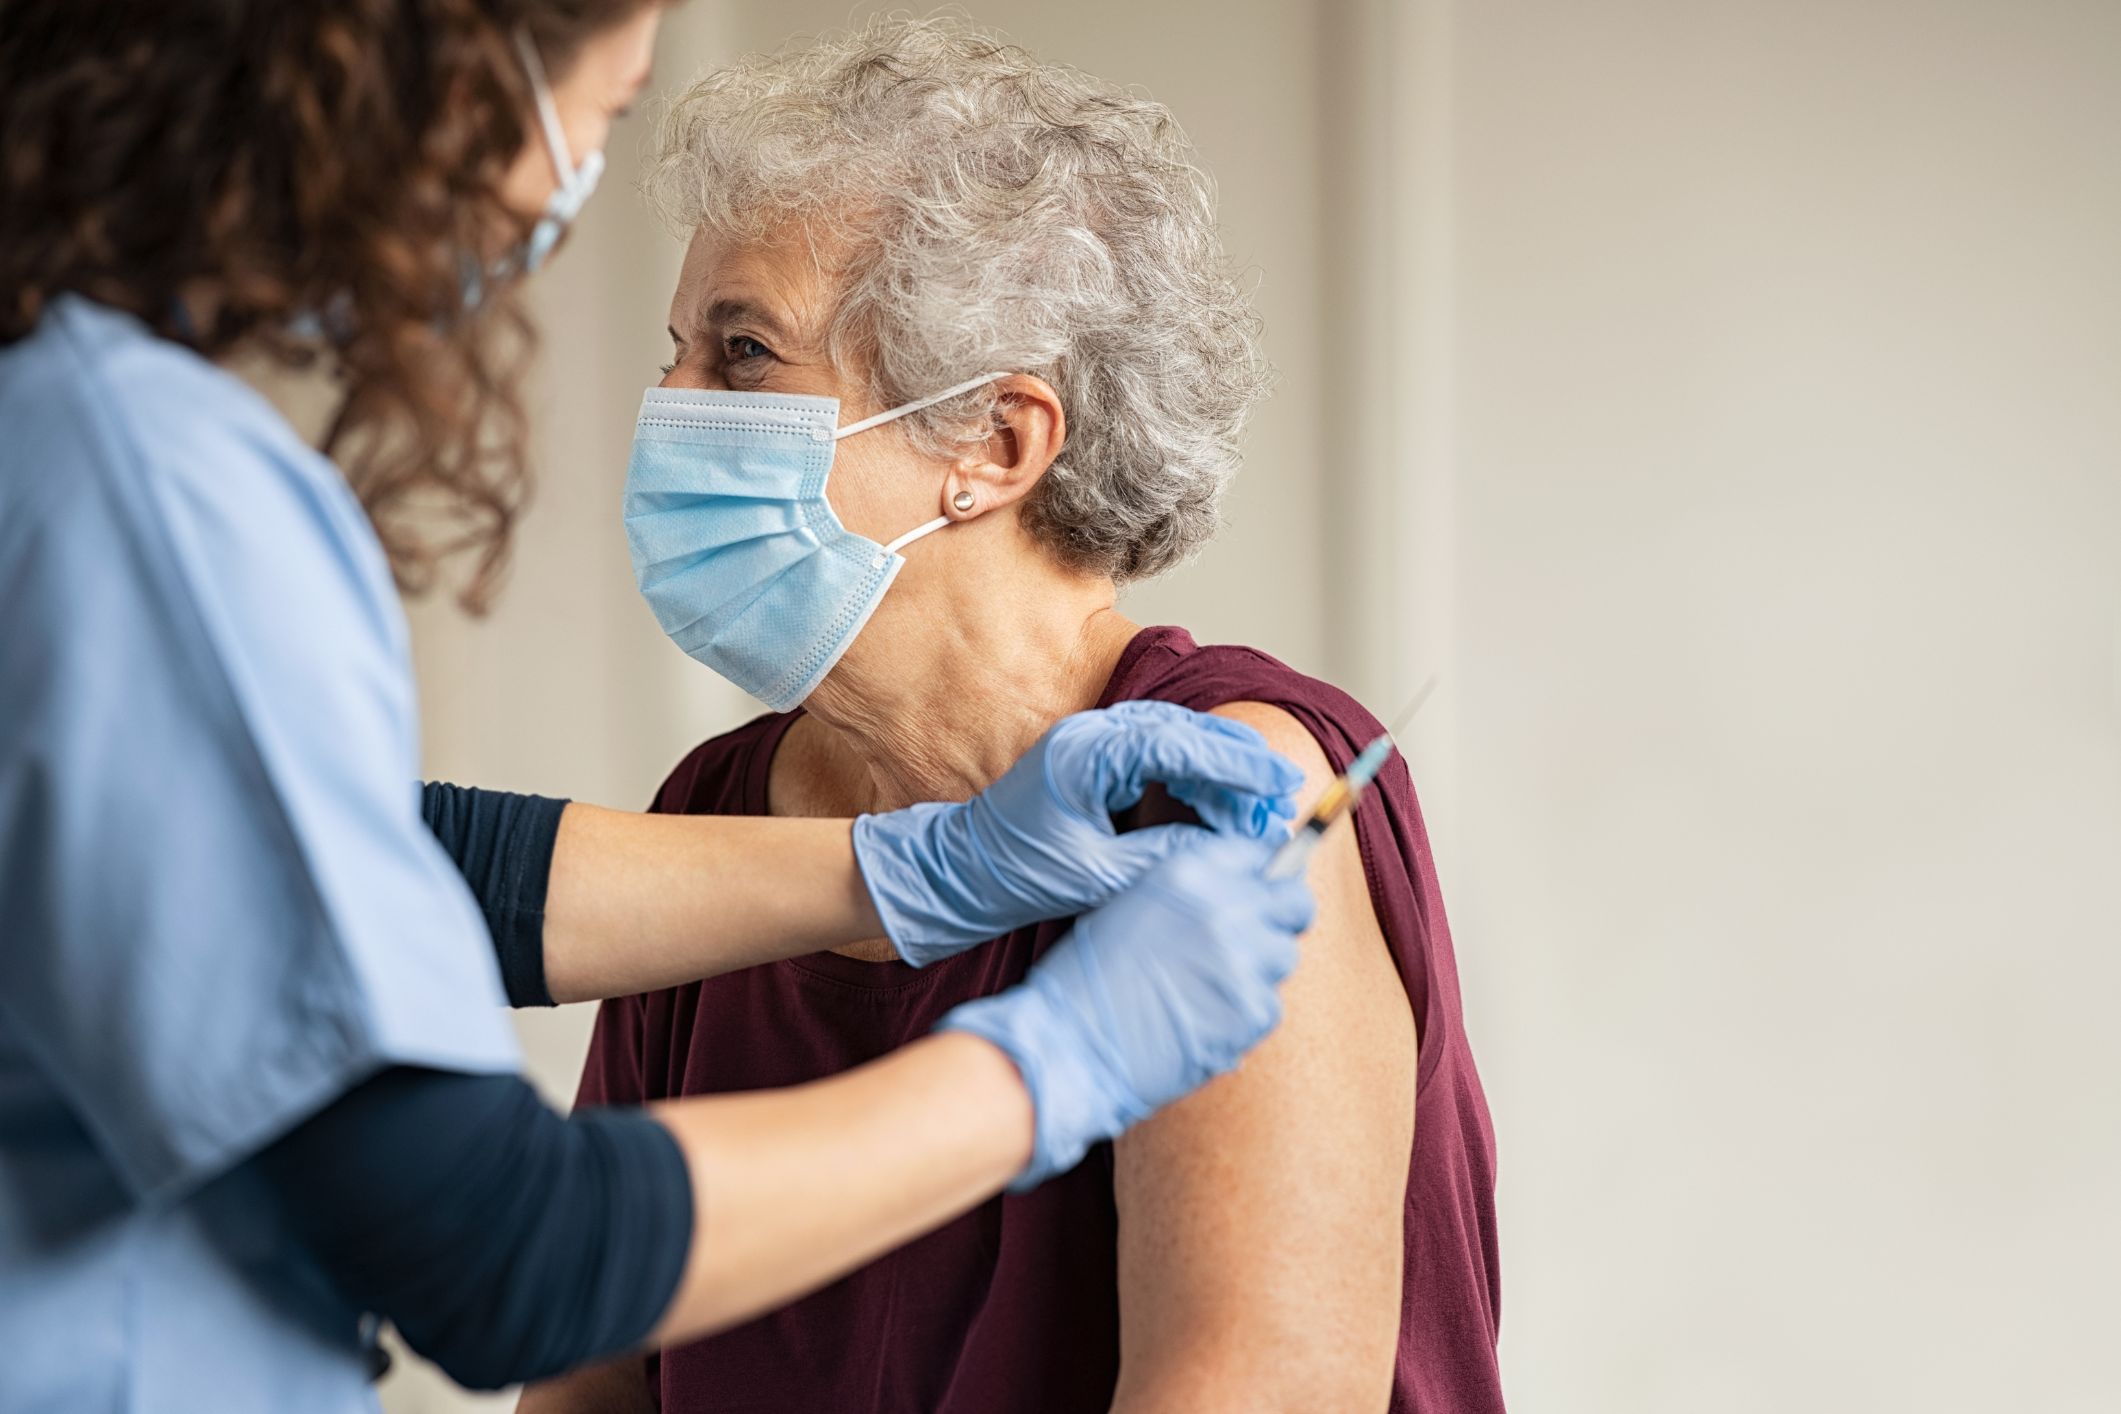 Too many Australians are avoiding getting a flu vaccine. Why?